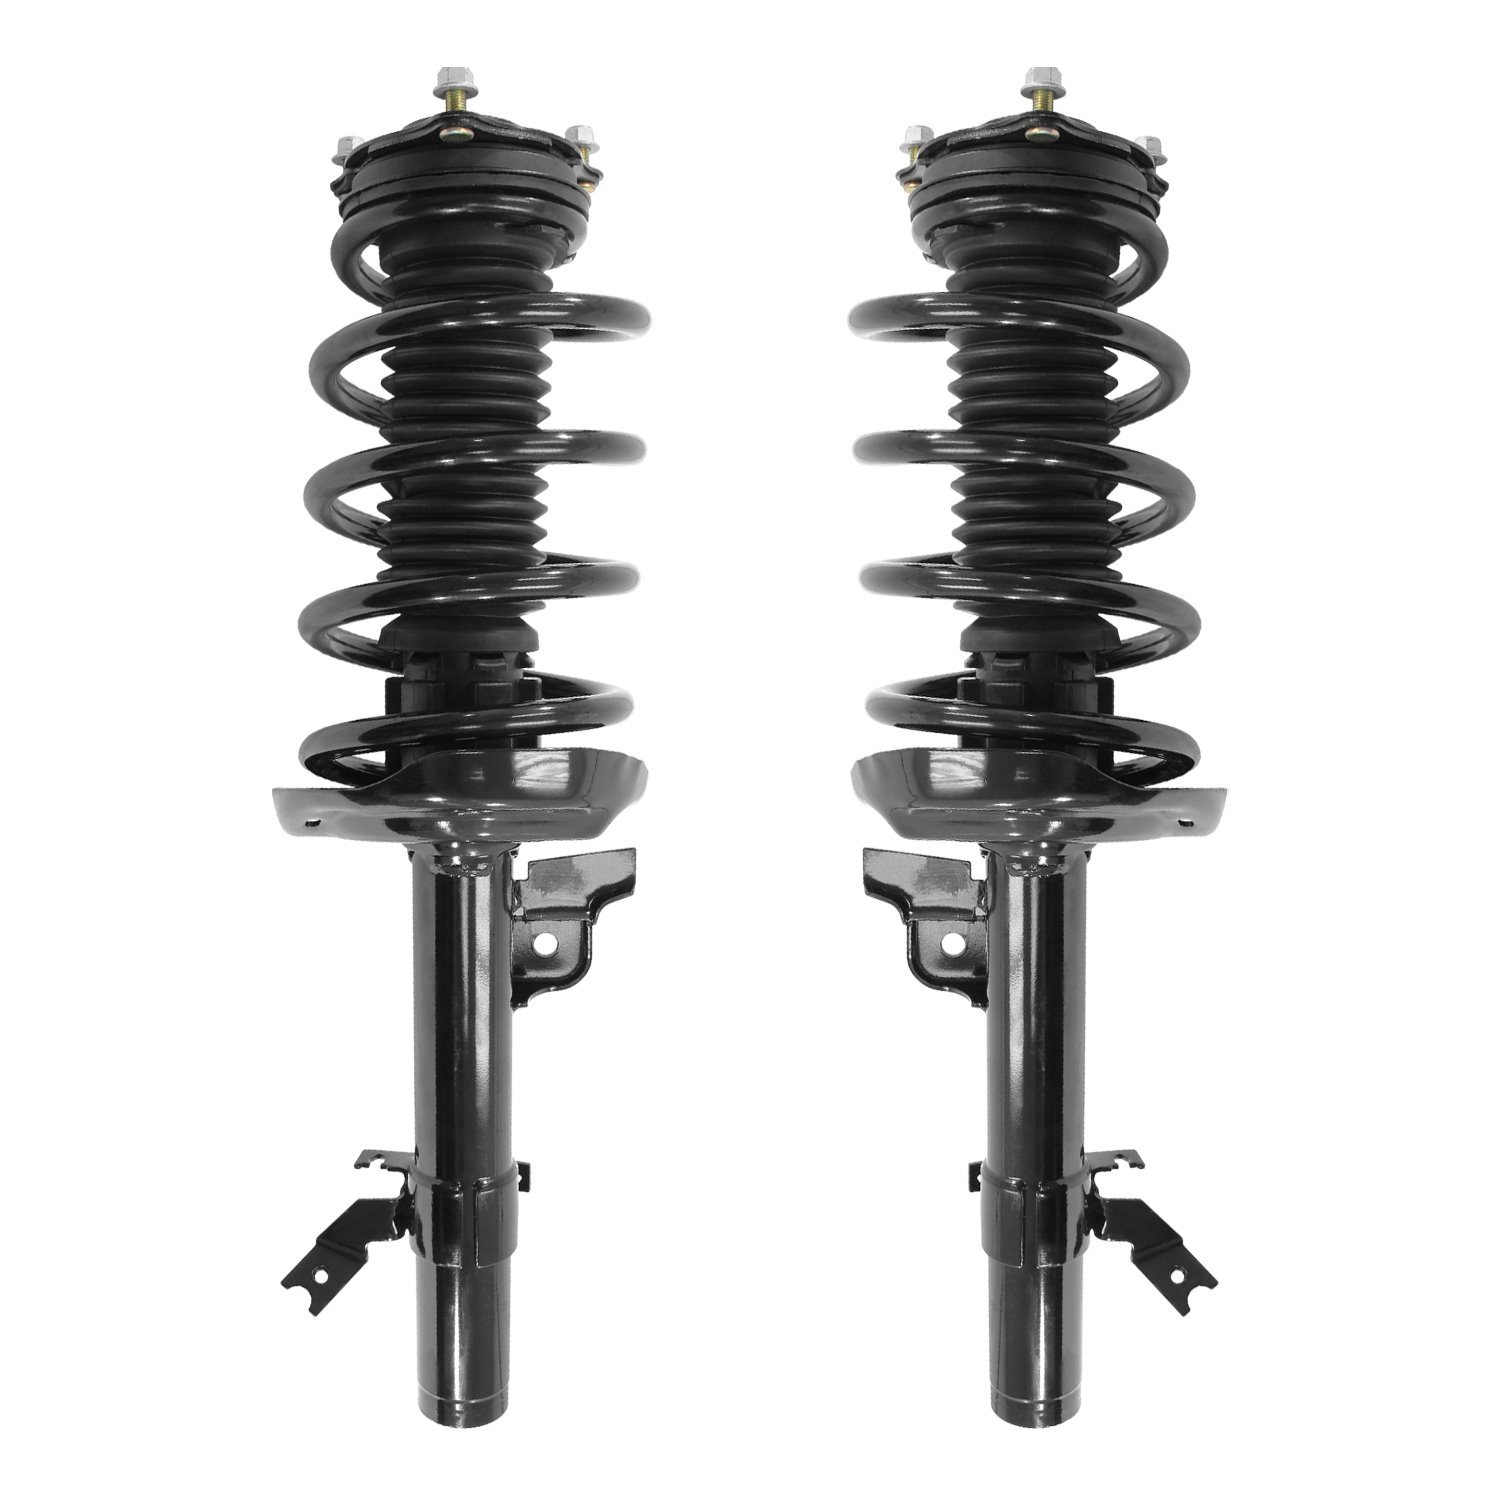 2-13251-13252-001 Front Suspension Strut & Coil Spring Assemby Set Fits Select Acura MDX